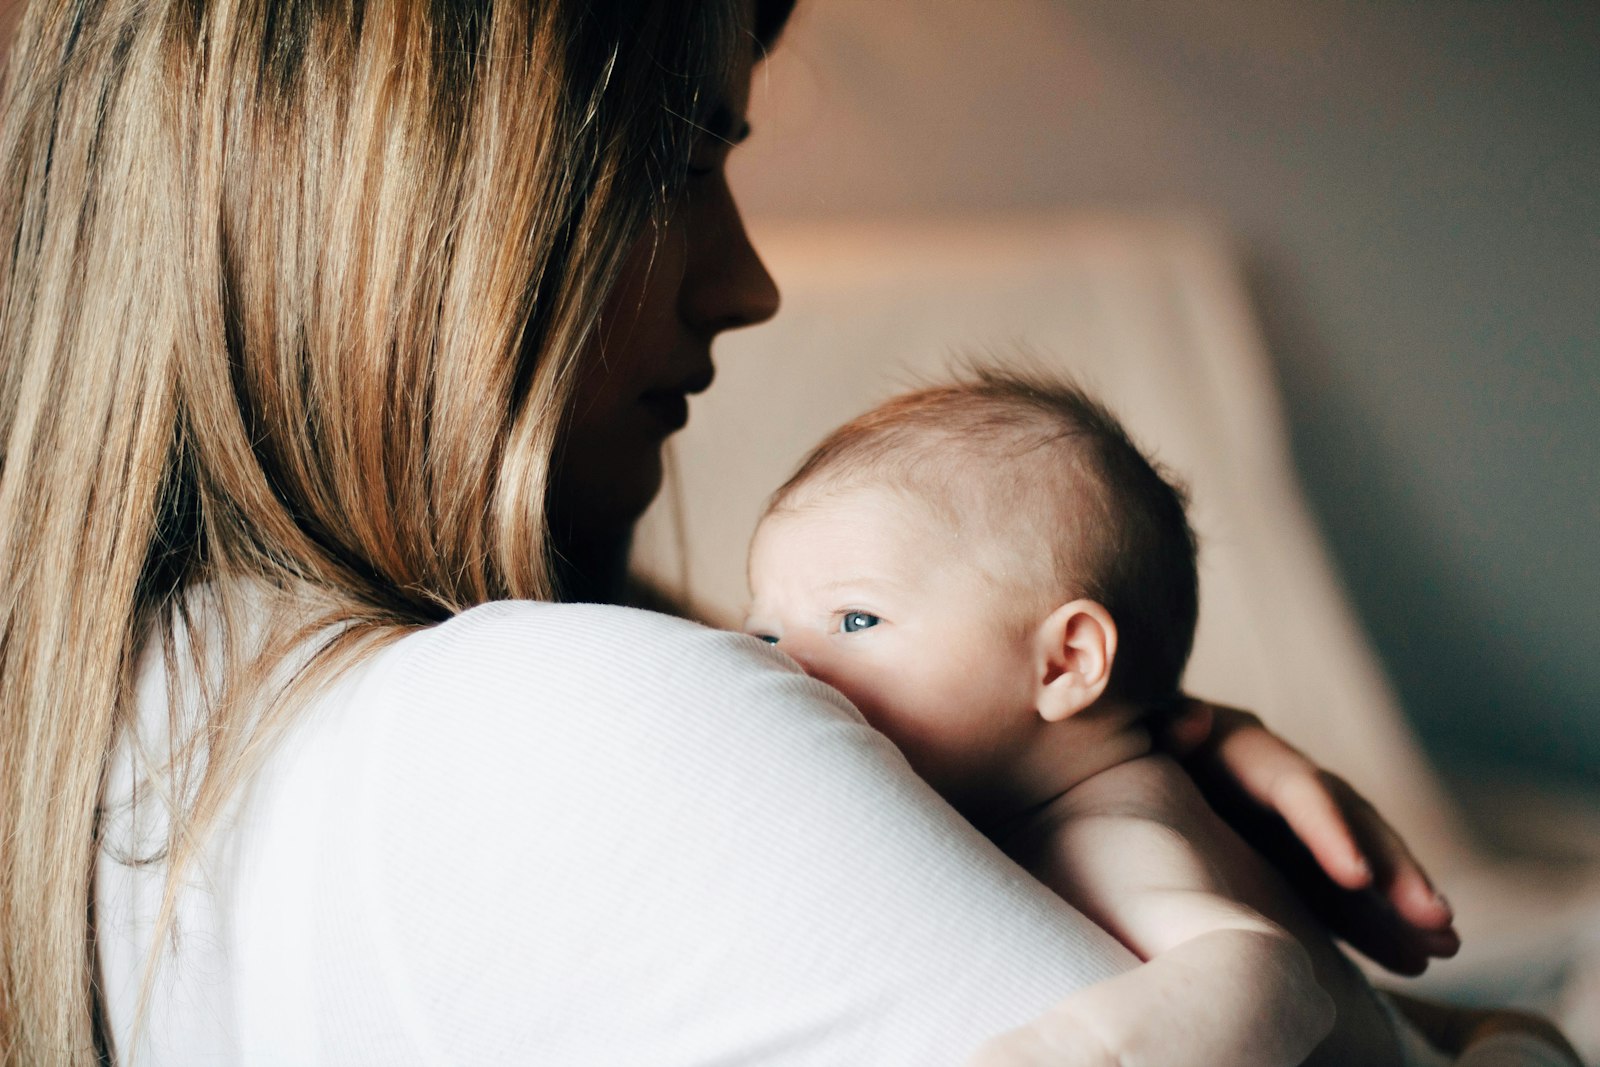 A new mom's guide to navigating unwanted advice